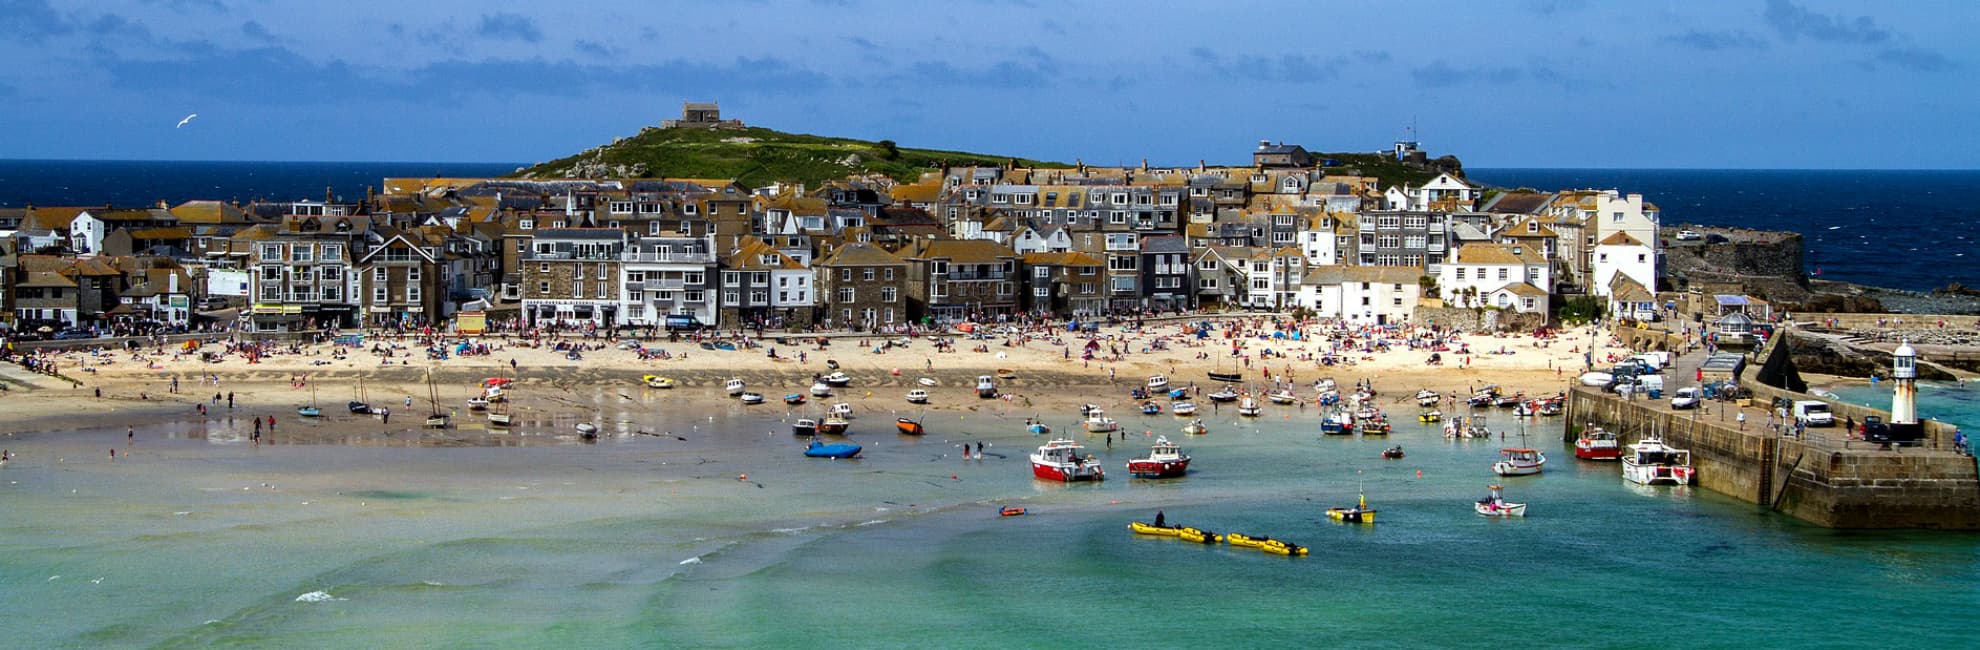 A view over the bay and town of St Ives in Cornwall